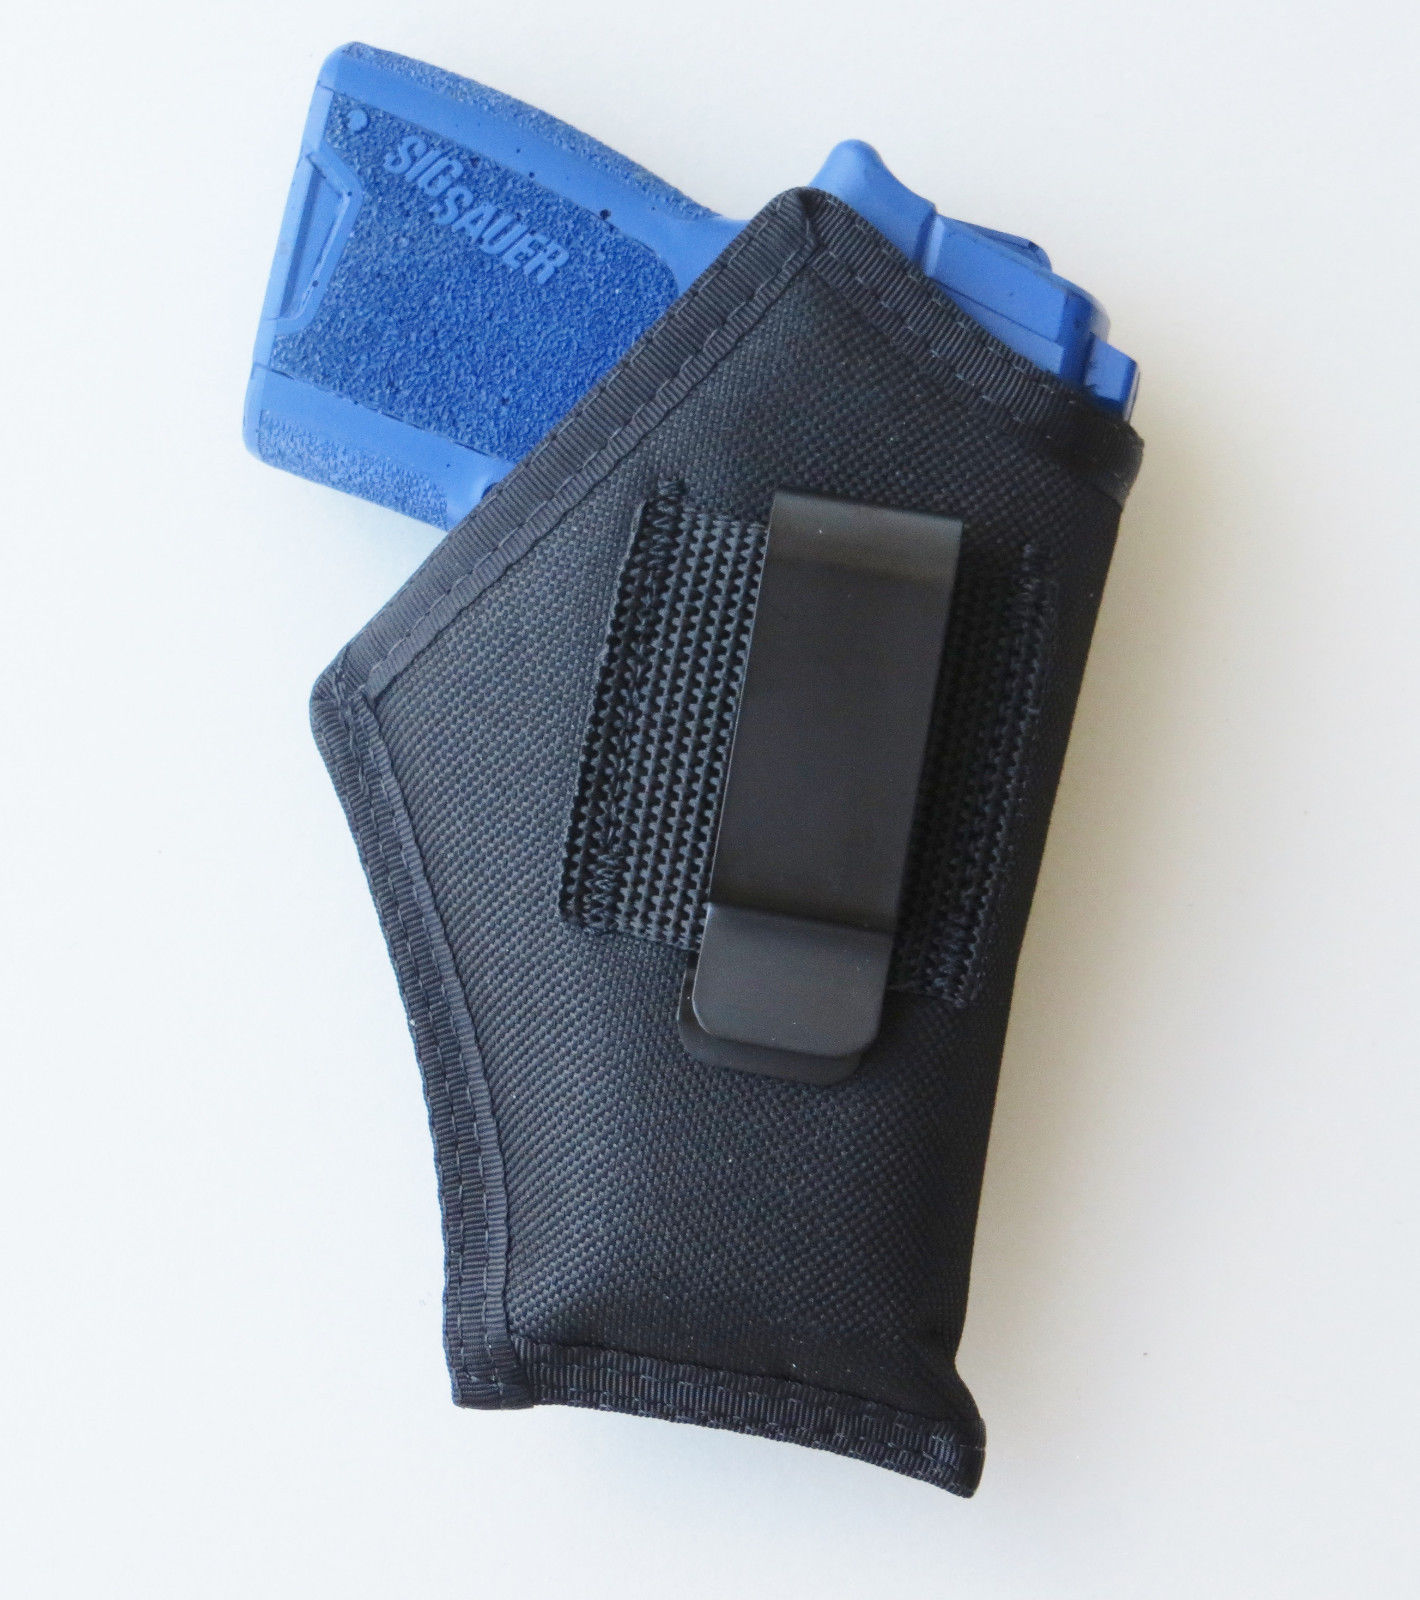 Low Profile Inside Pants IWB Gun Holster for SIG SAUER P290 Compact Pistol - $14.46